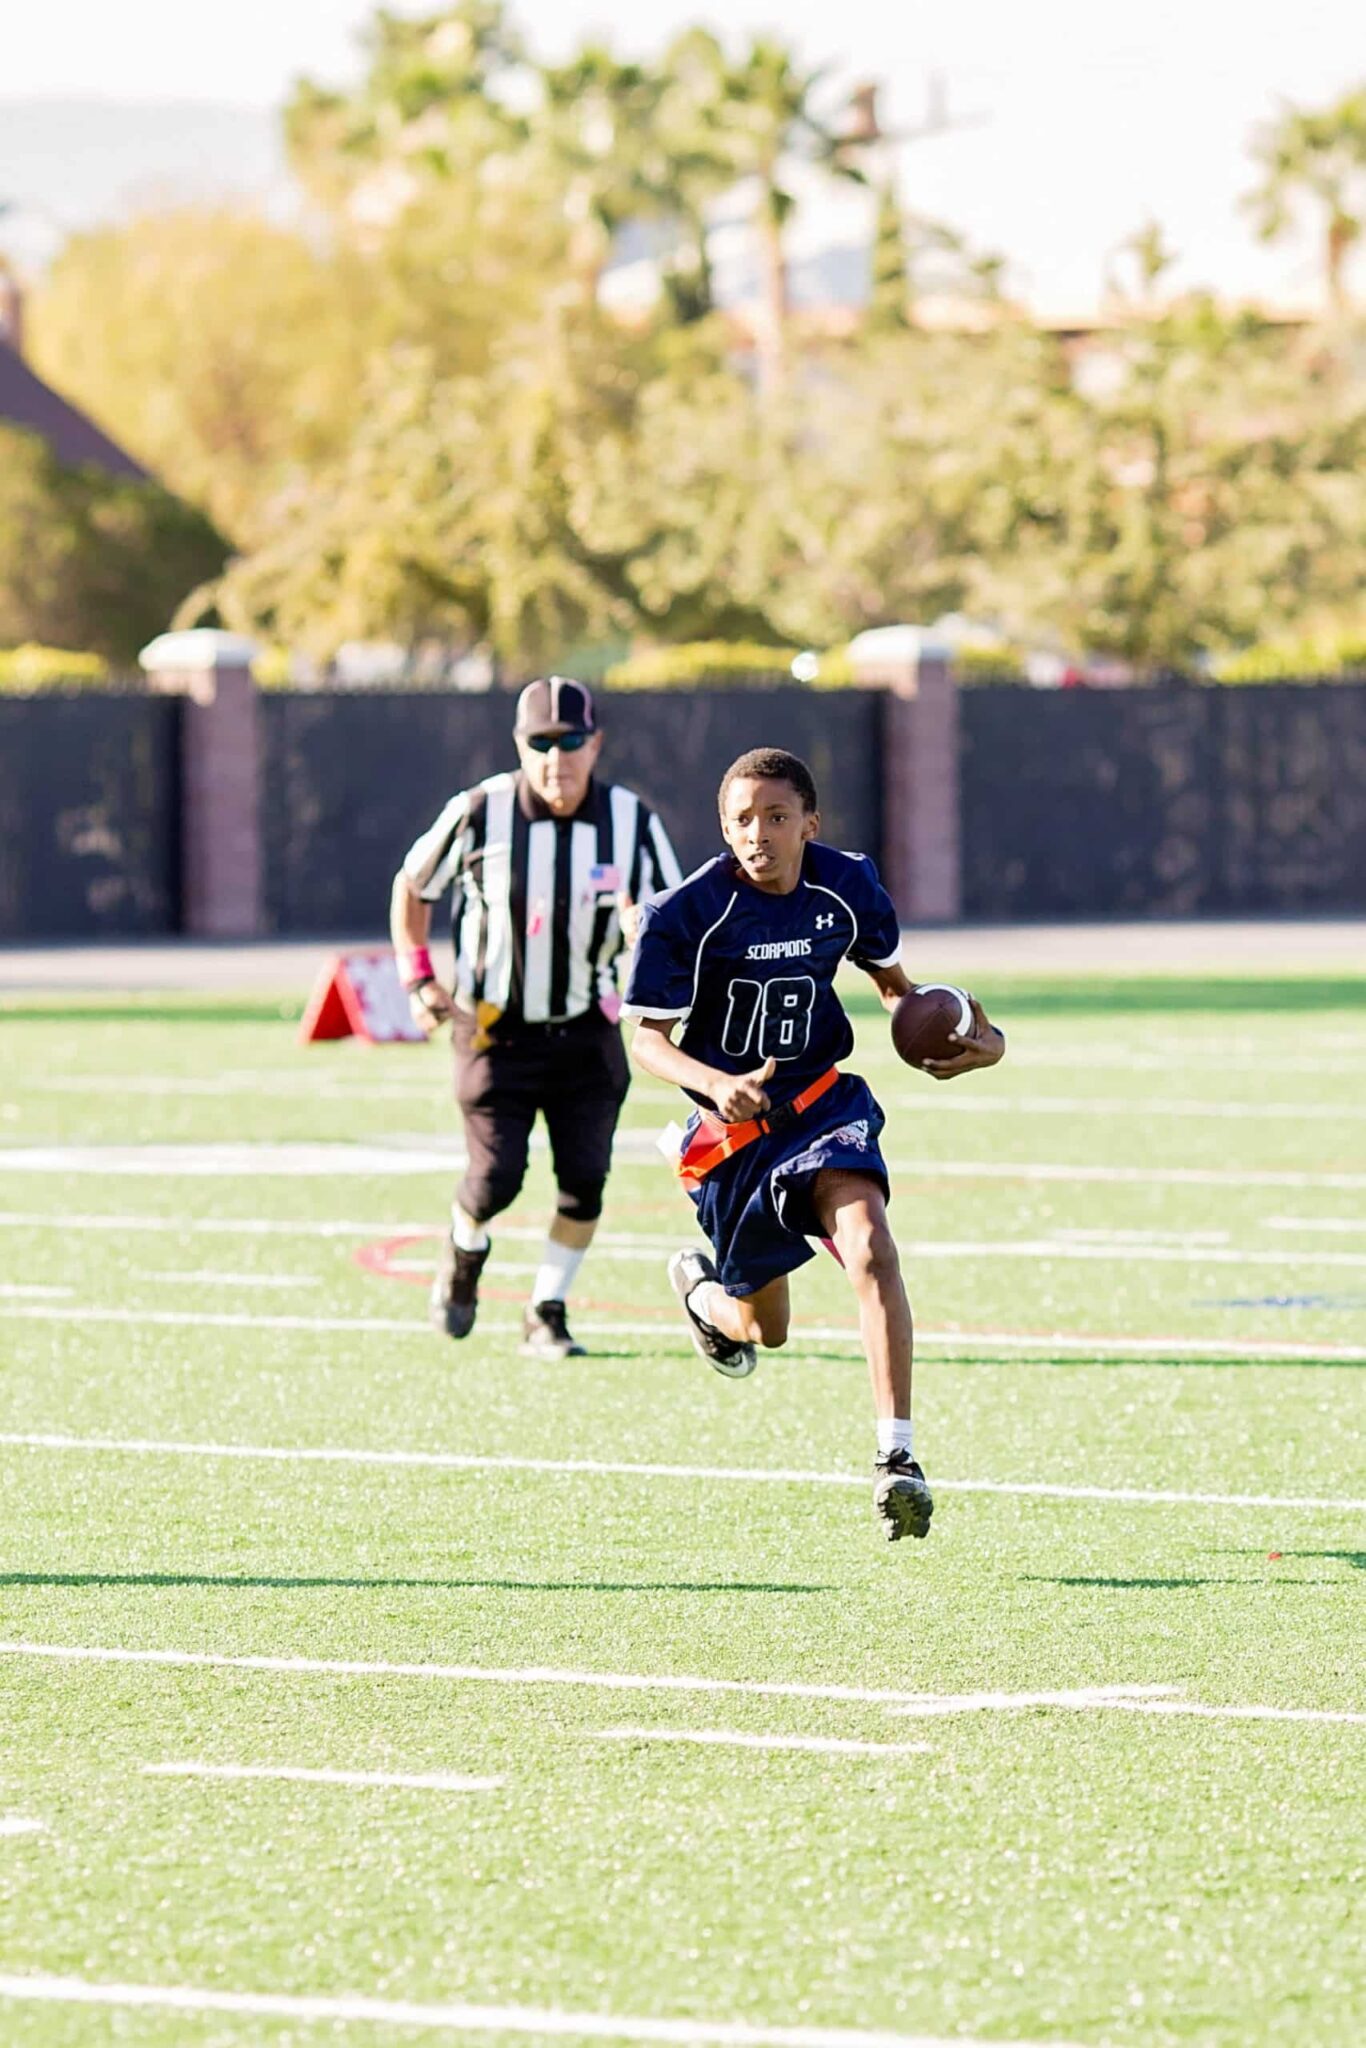 A young student football player runs with a football on a football field with a referee behind them